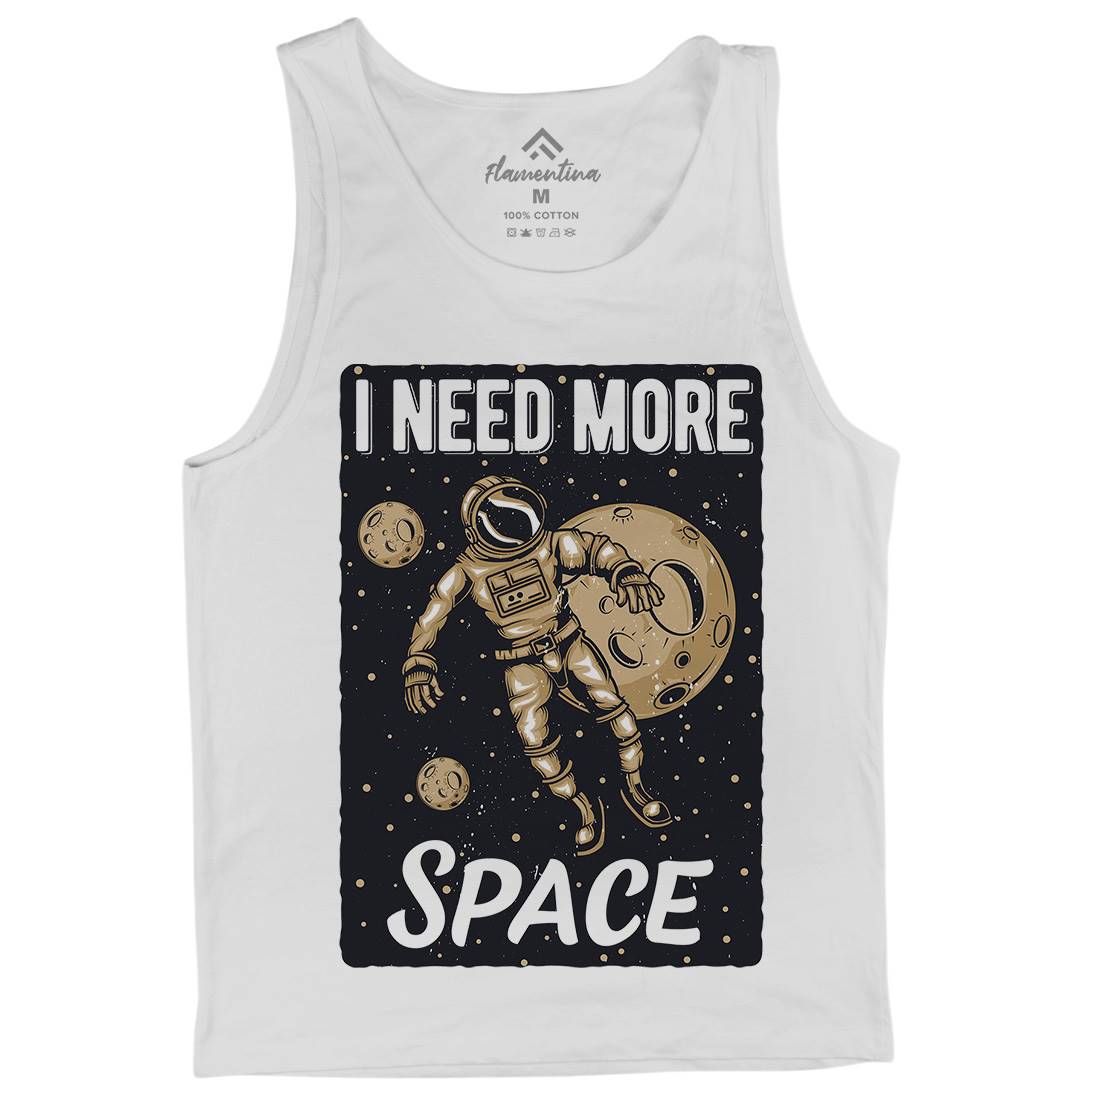 Need More Mens Tank Top Vest Space B168